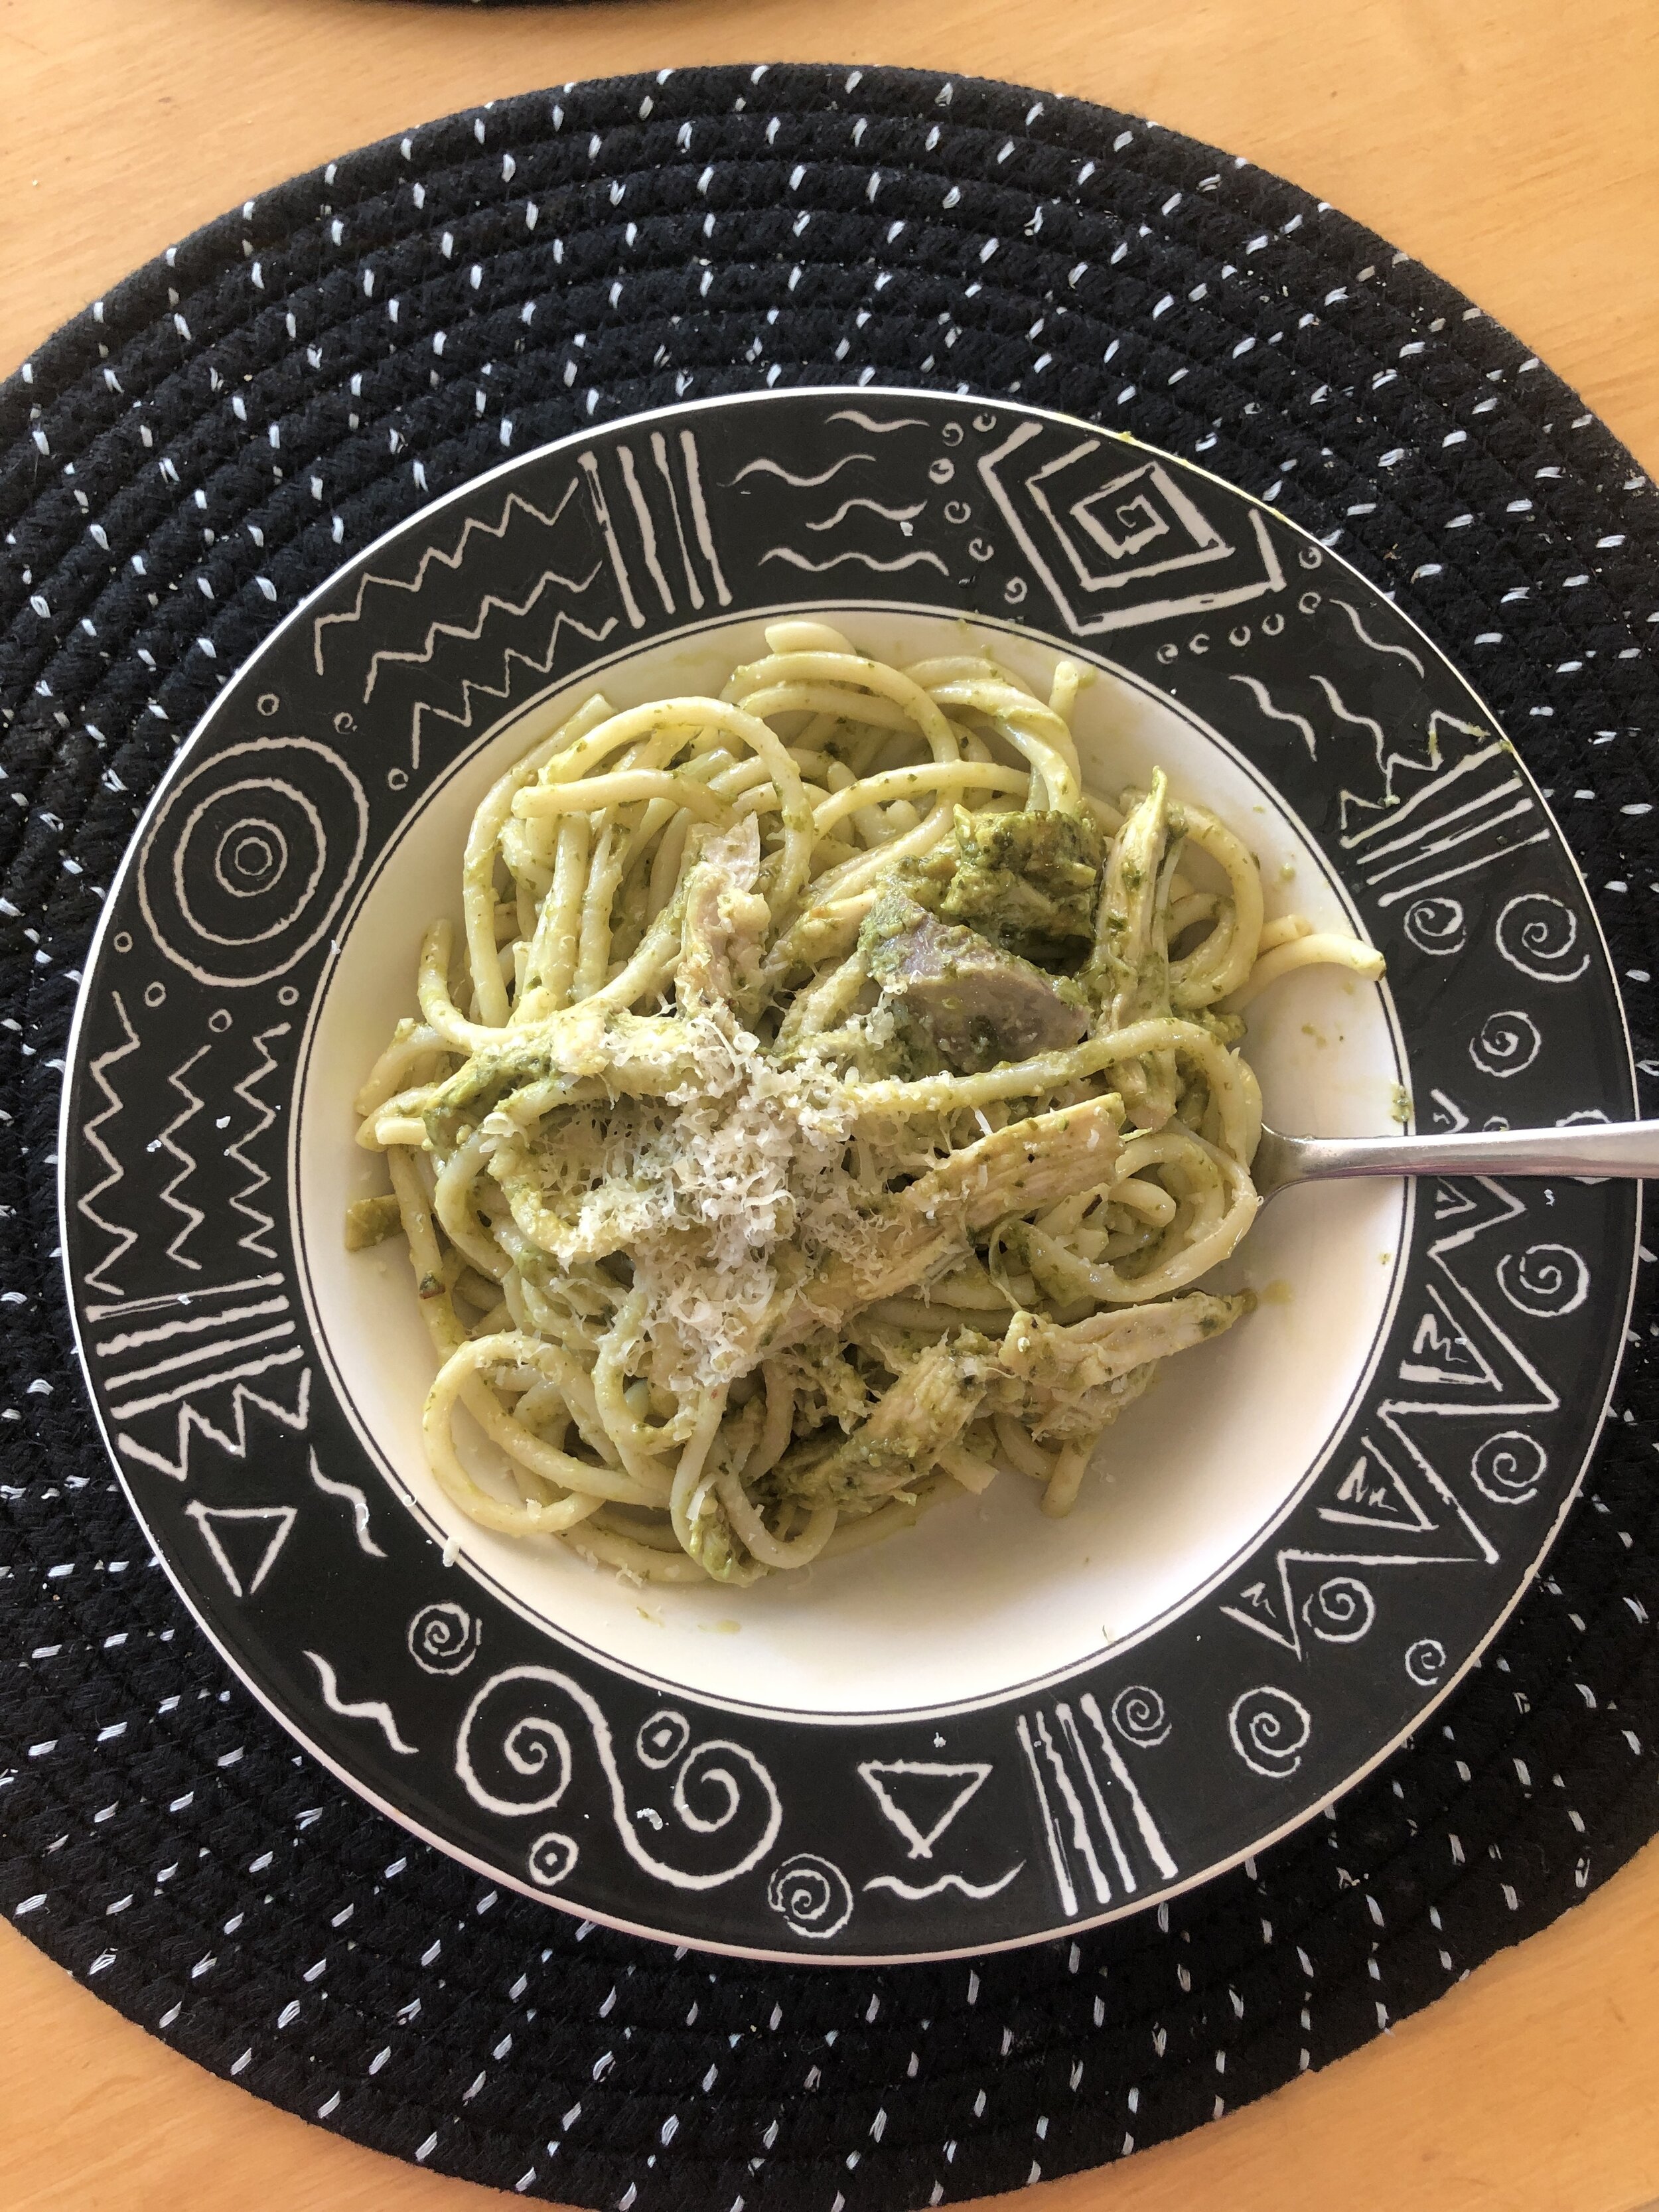 Charlie's Table gluten free pasta discount code